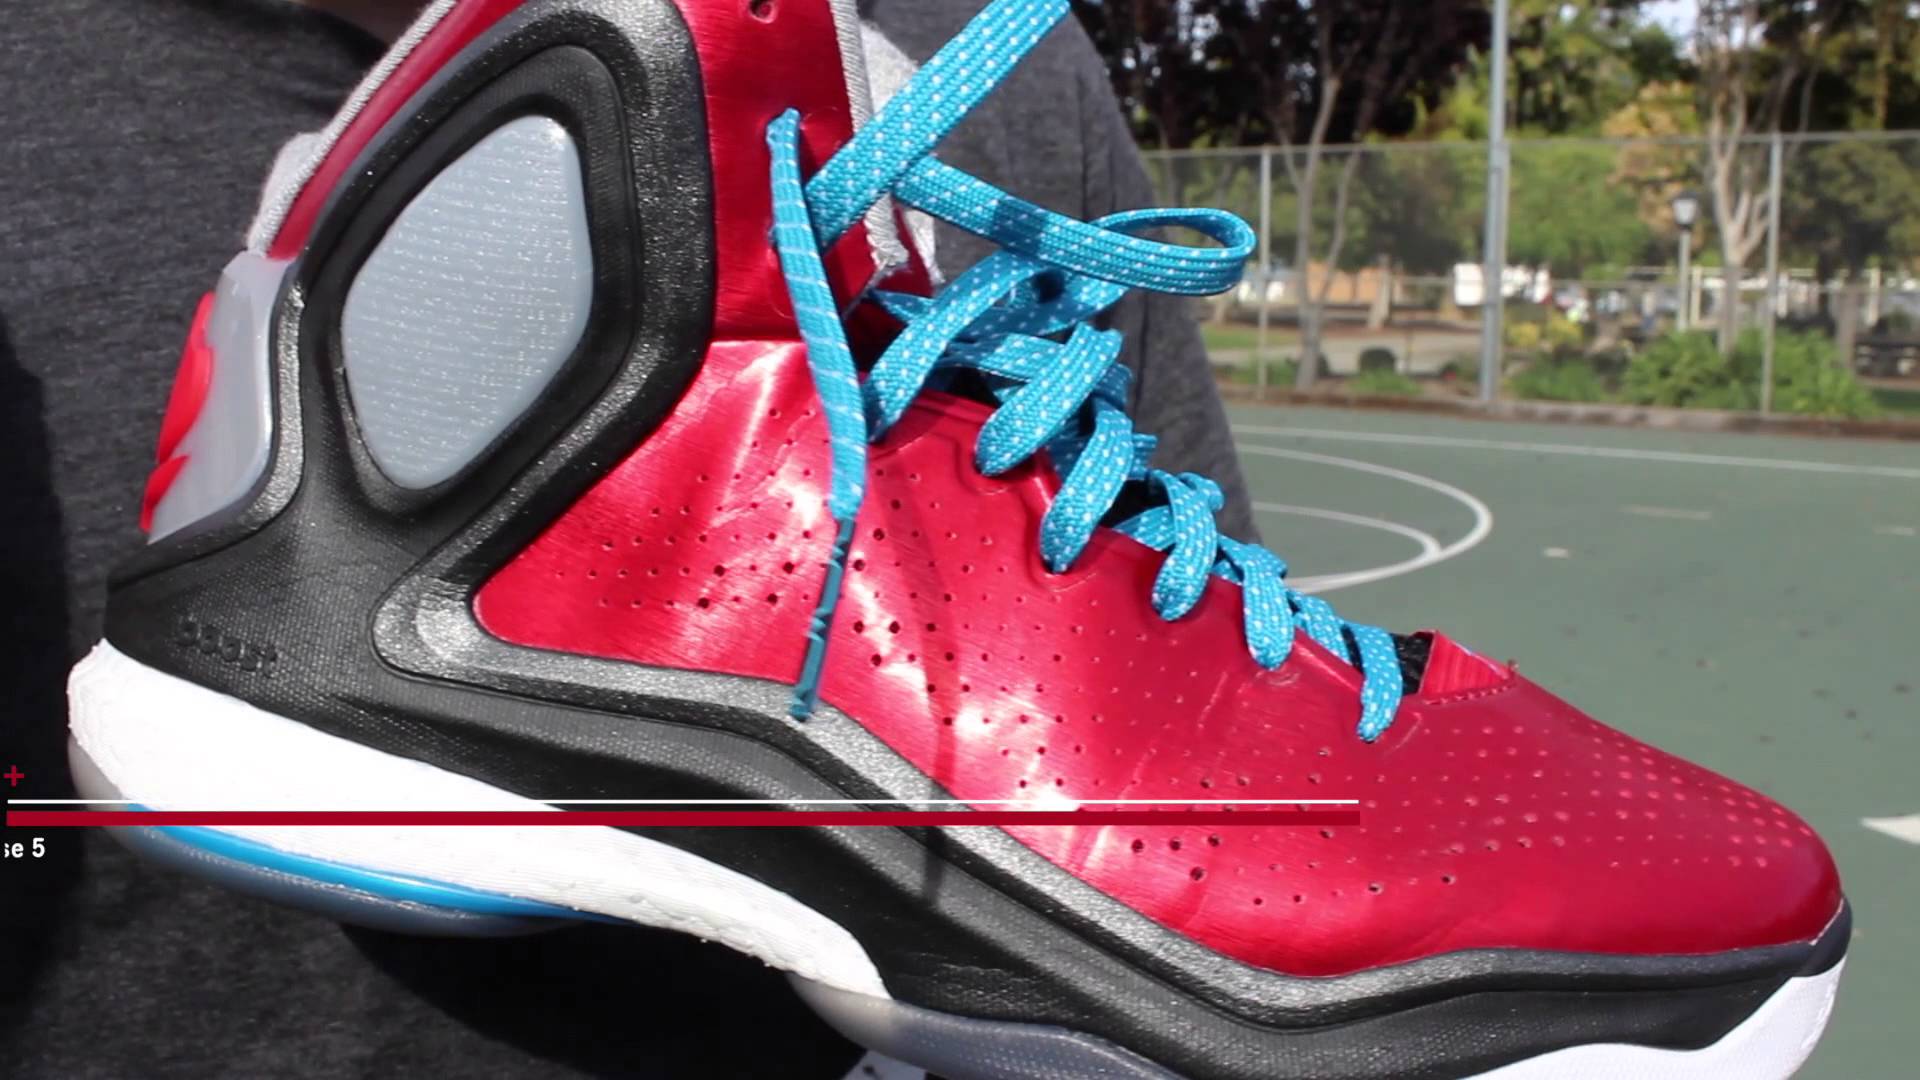 adidas d rose 5 Boost Performance Review - YouTube